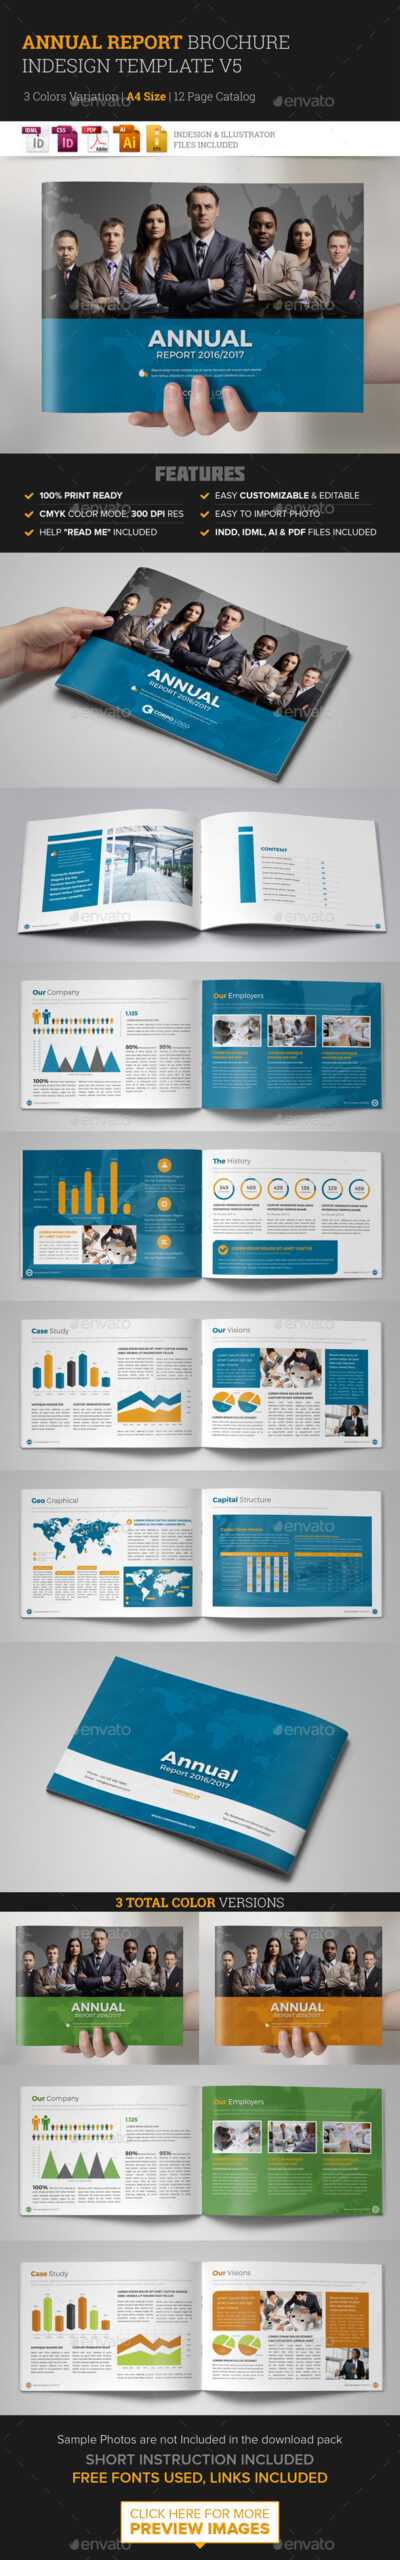 Annual Report Template Indesign Graphics, Designs & Templates With Regard To Free Annual Report Template Indesign